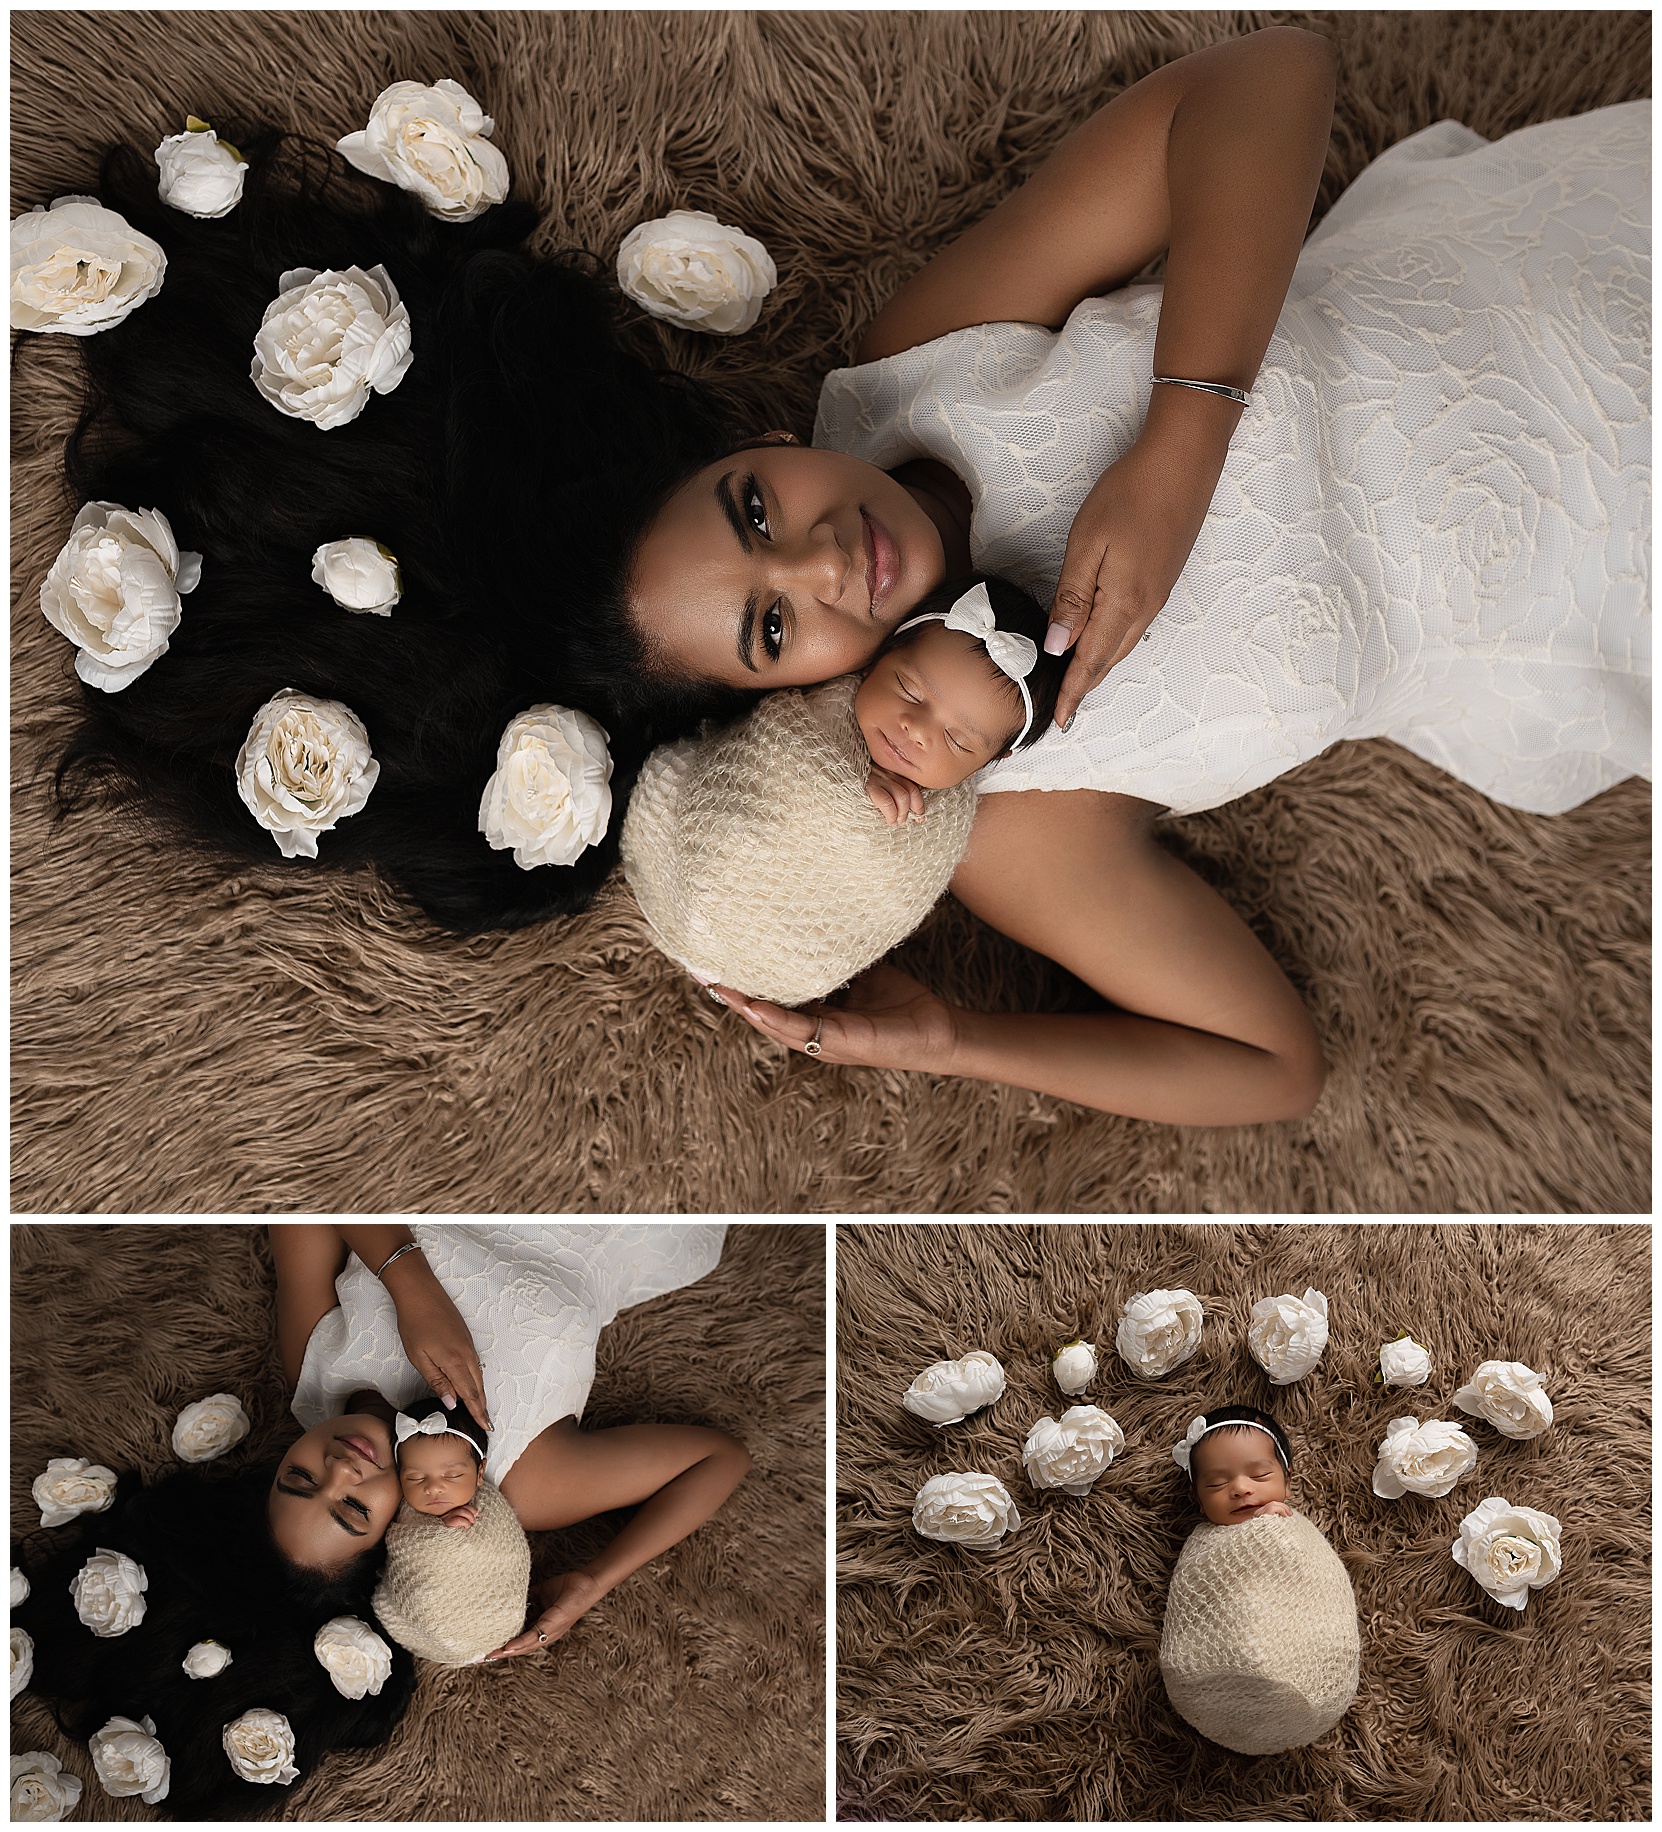 mom and wrapped baby brown rug white flowers